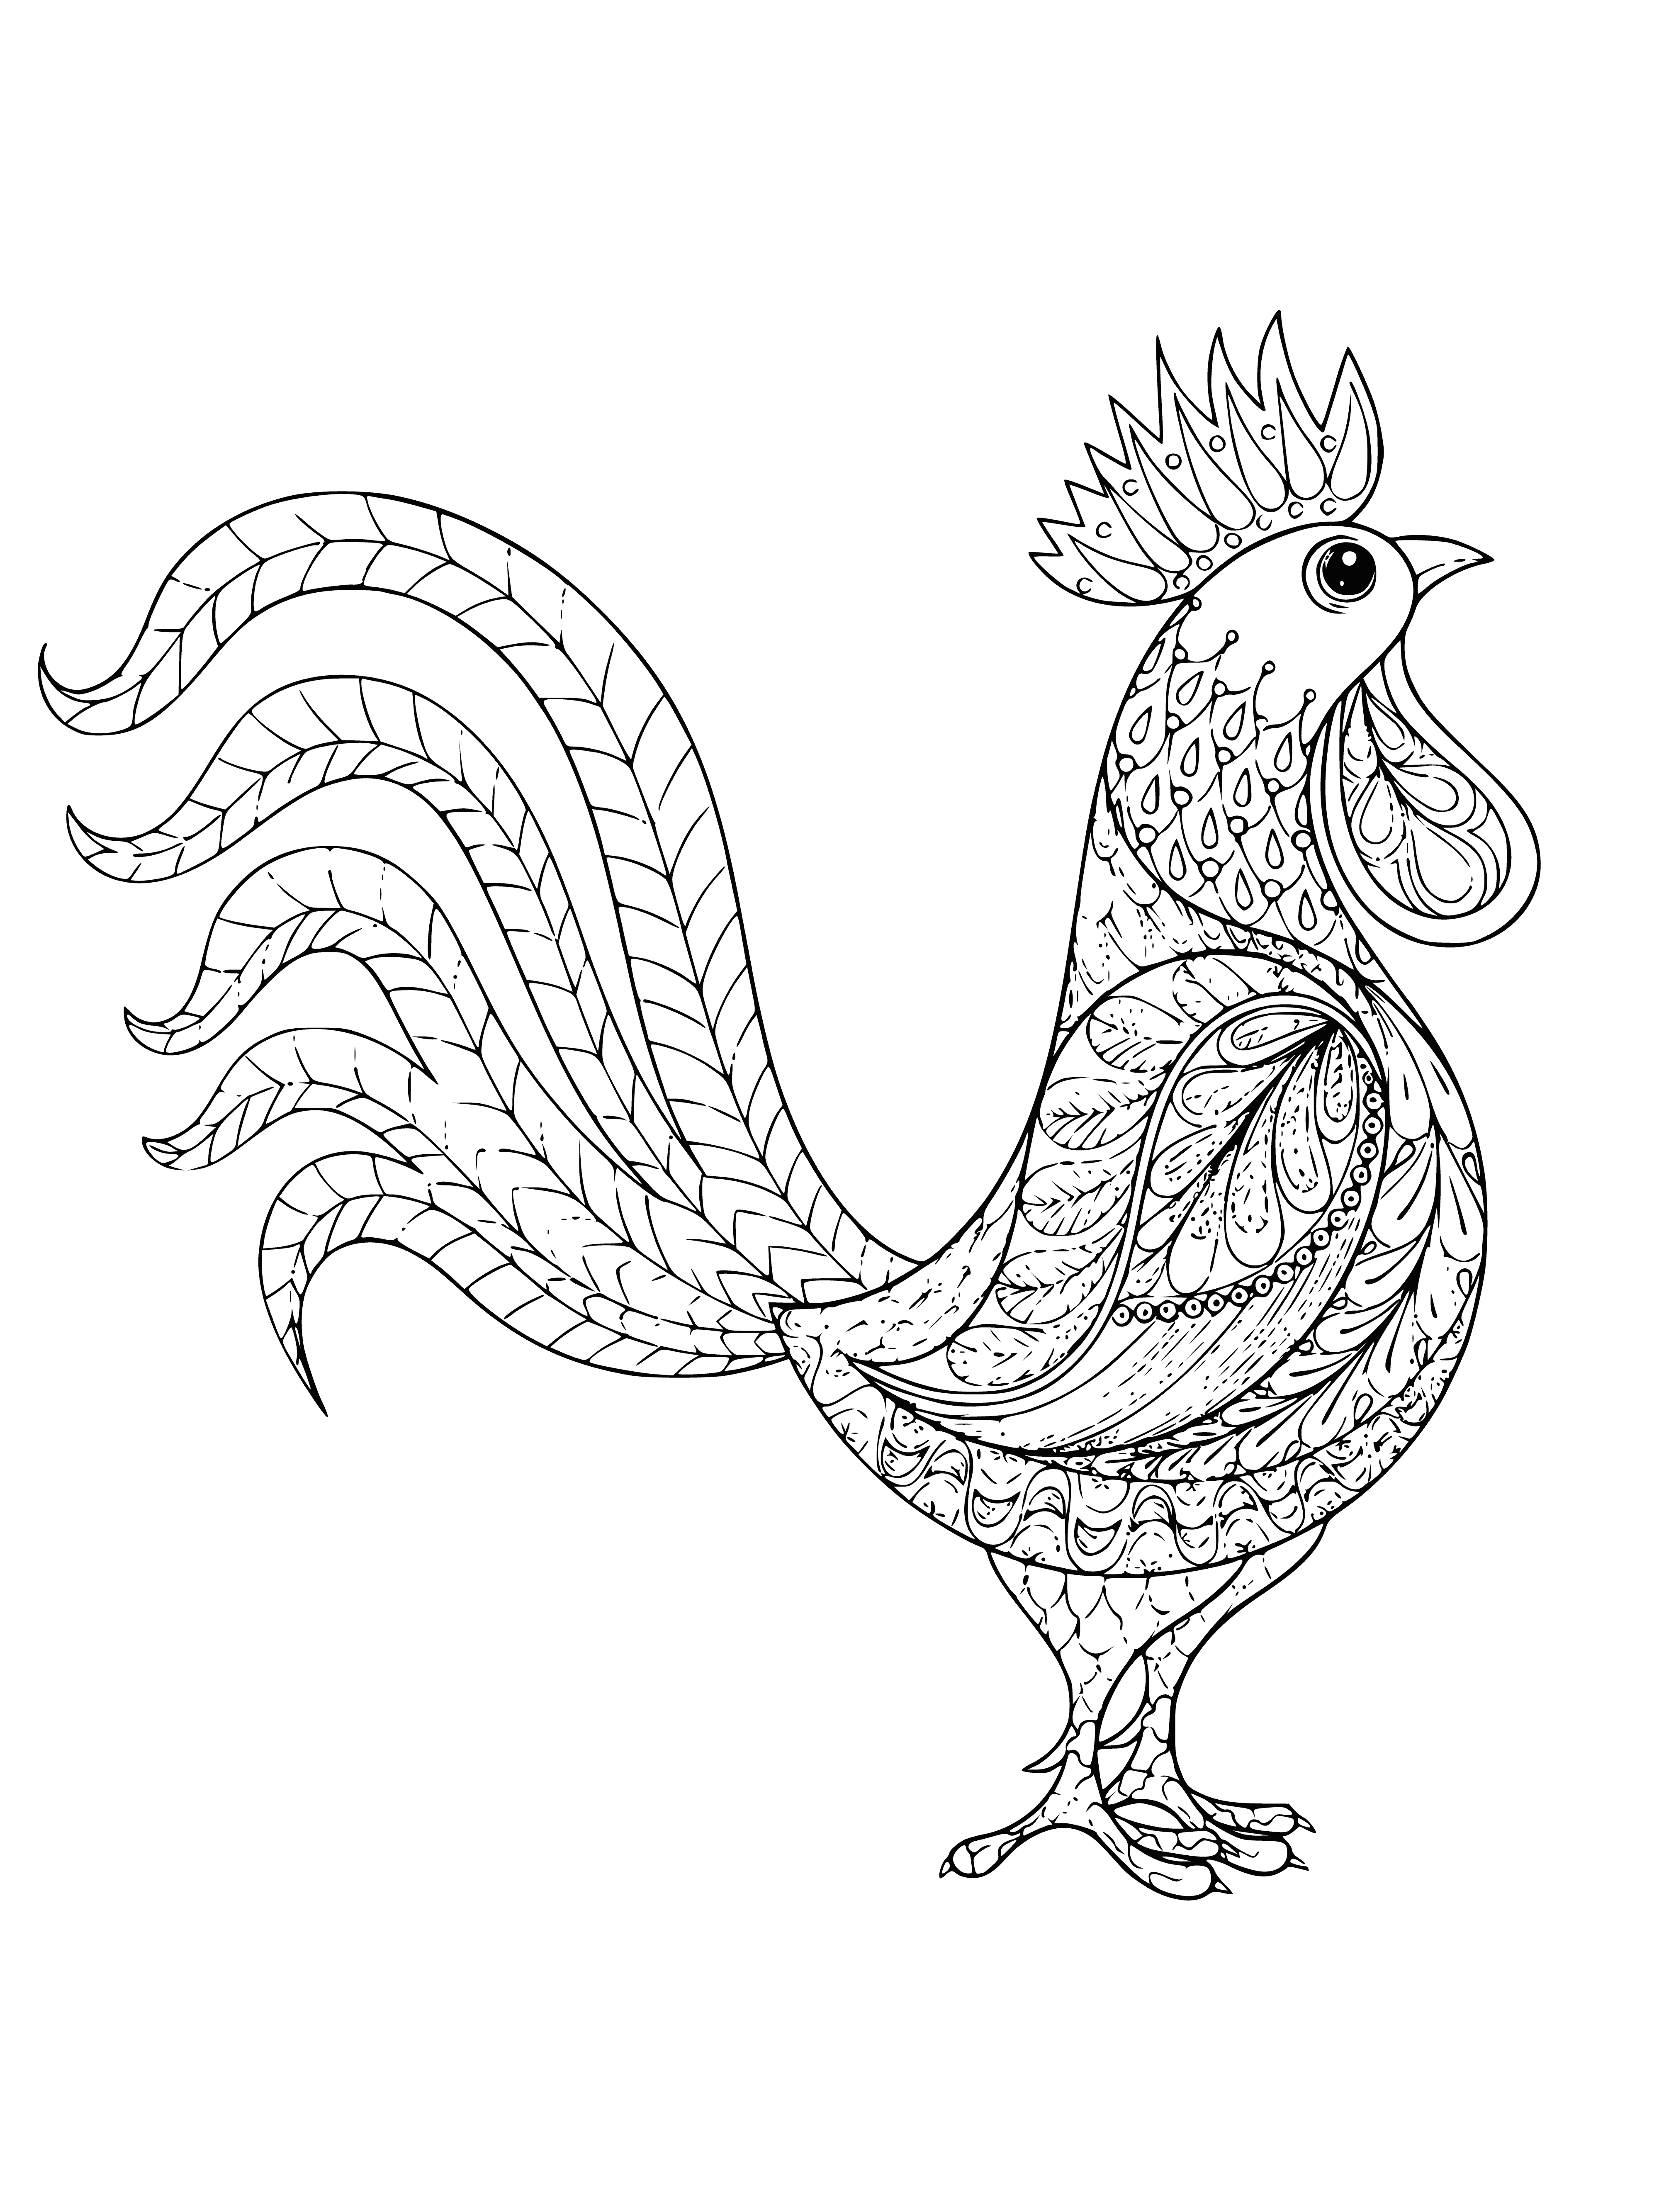 coloring page: Rooster with red comb stands proudly on farm fence, wings outstretched, confident stare. #rooster #farm #fence